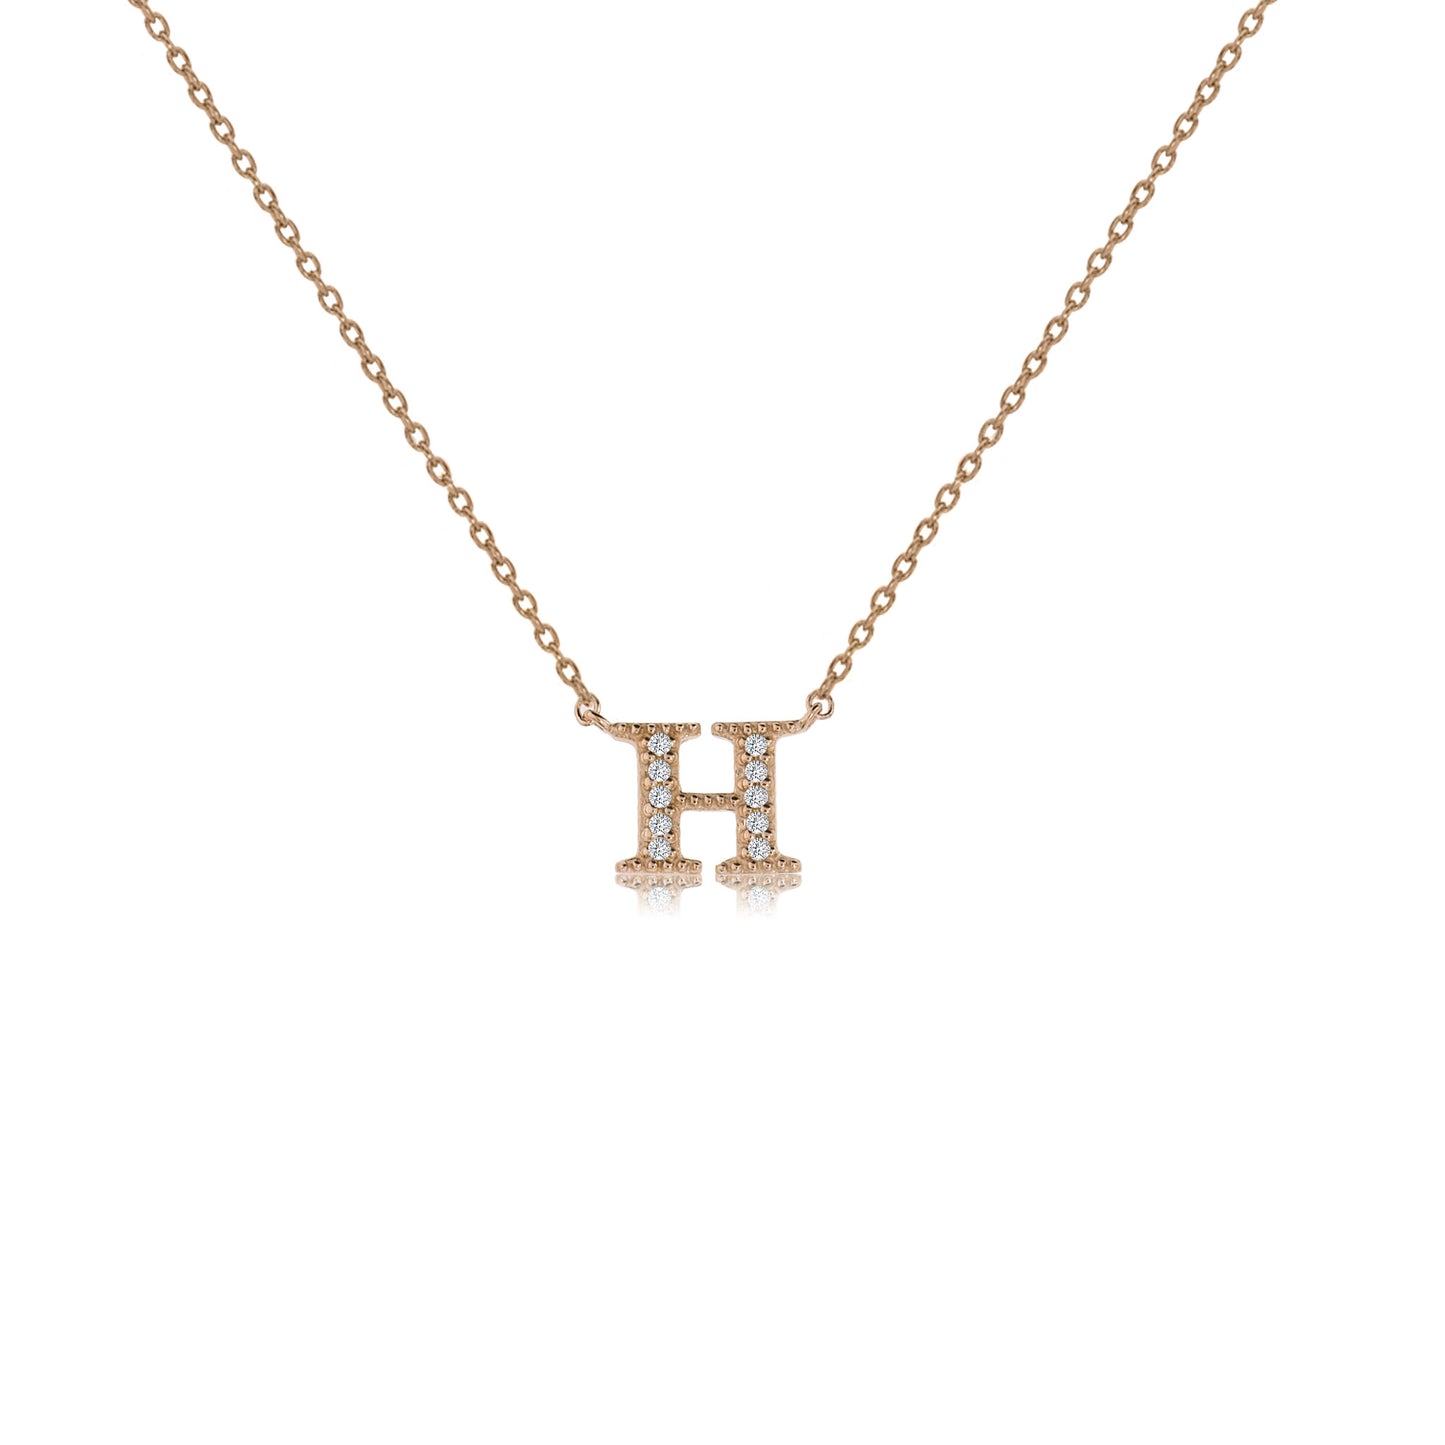 NT-26/R/H - Initial "H" Necklace with Sliding Length Adjuster